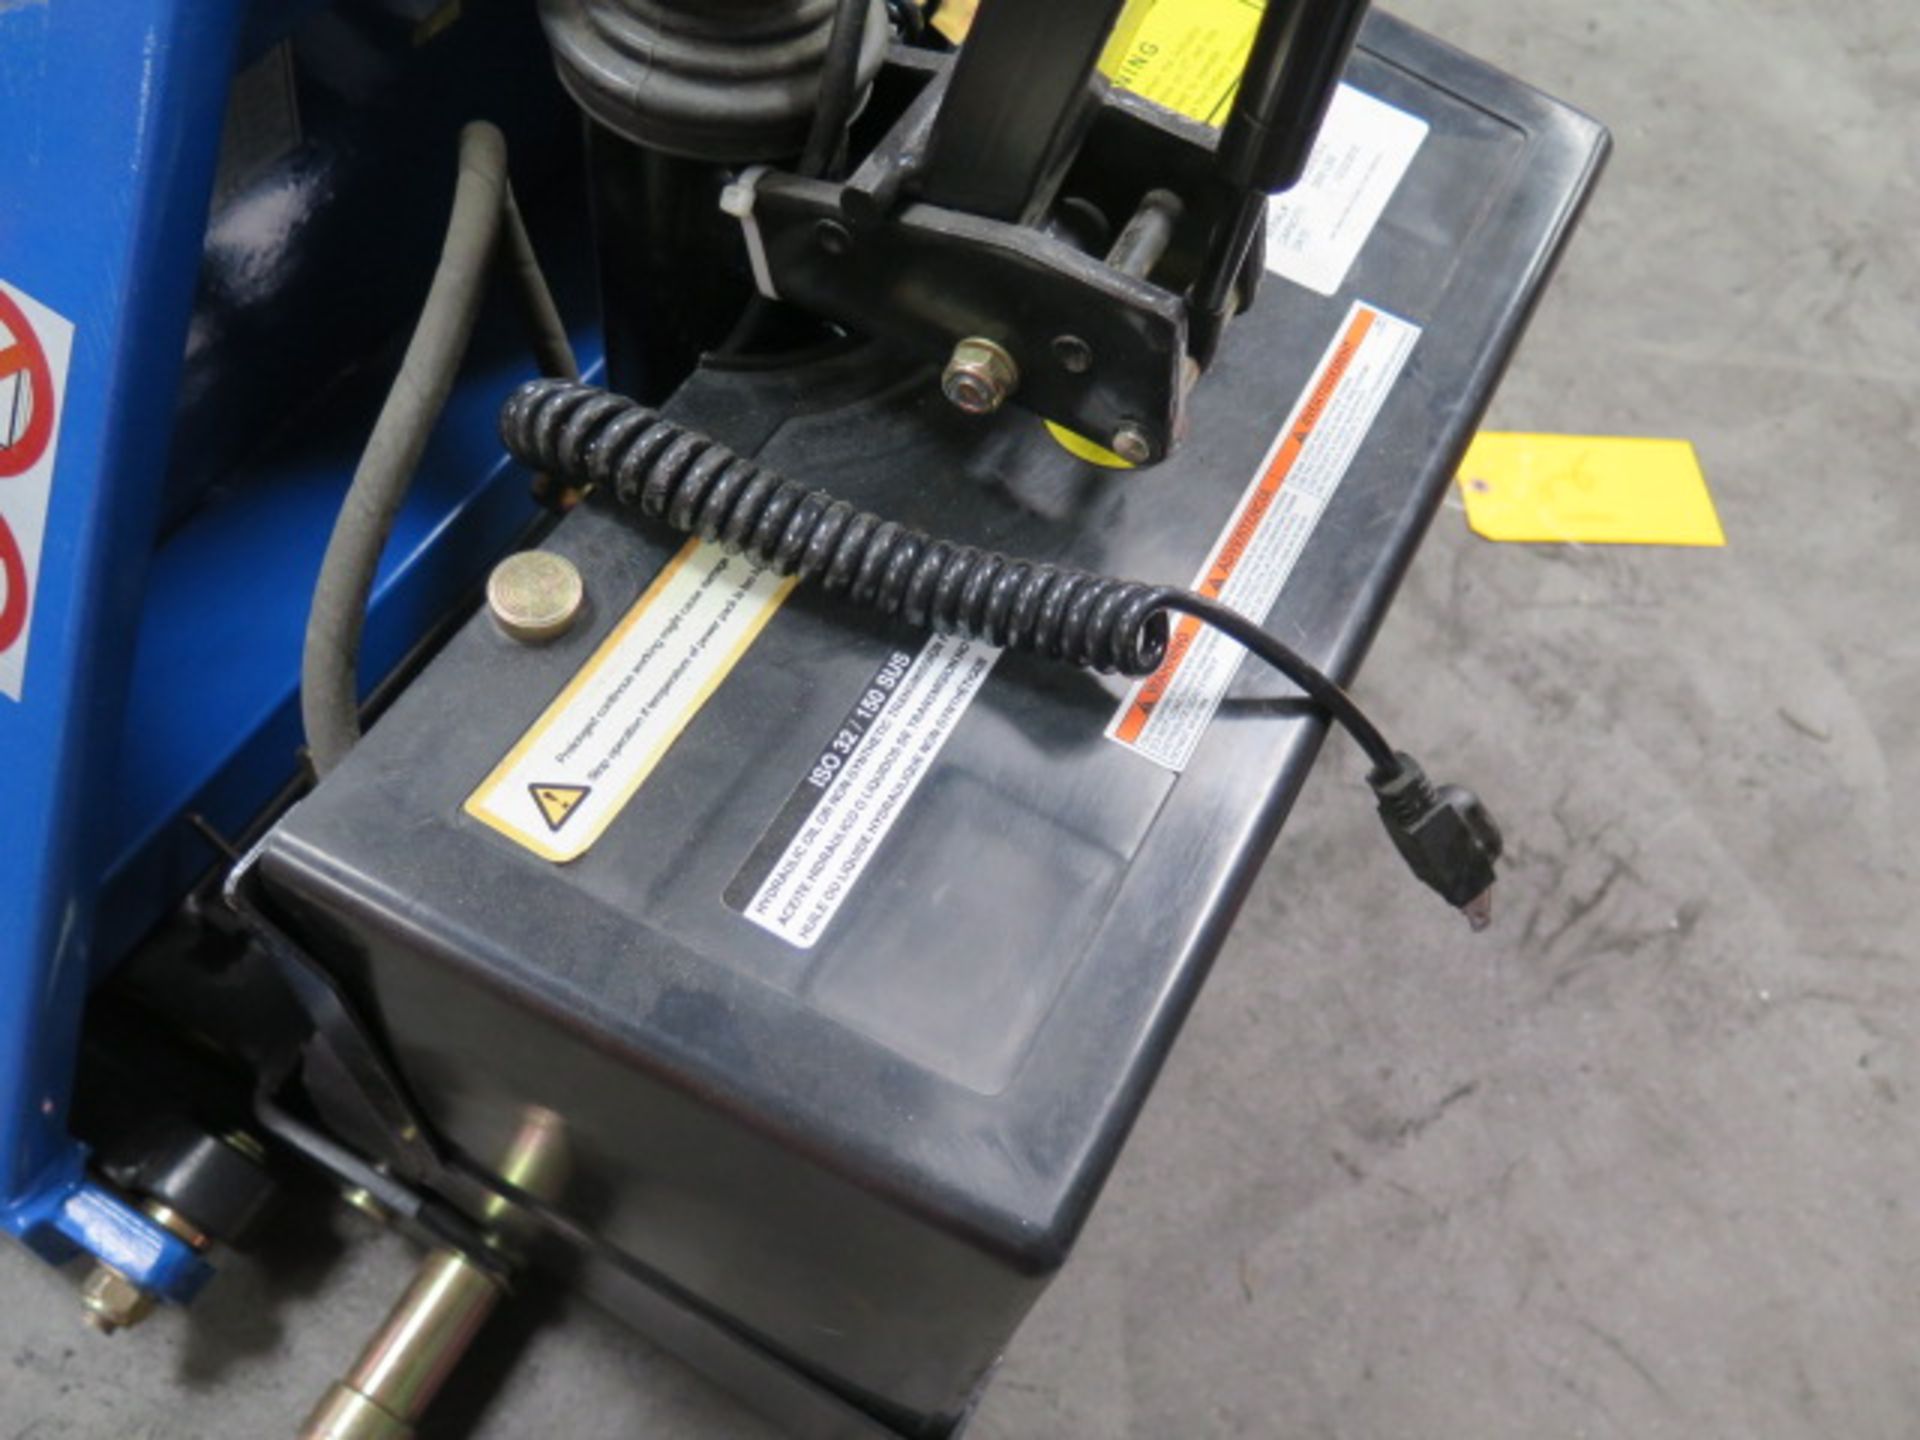 2015 Import mdl L-270-DC-HD 3000 Lb Cap Electric Pallet Jack w/ Built-In Charger, SOLD AS IS - Image 5 of 8